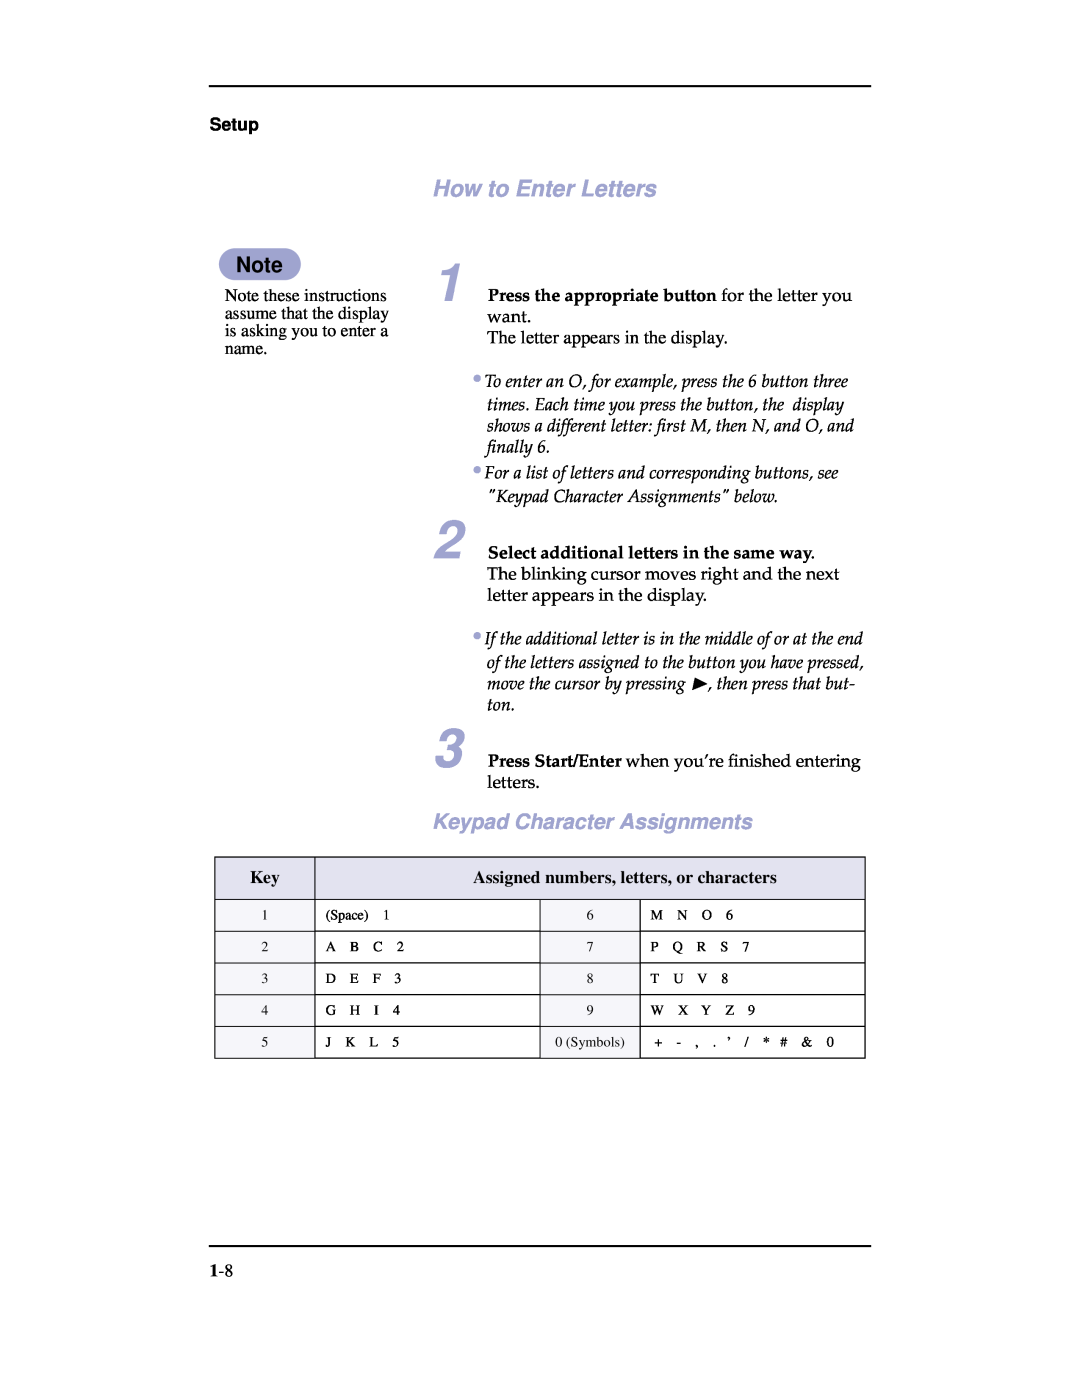 Samsung SF-3100 manual How to Enter Letters, Keypad Character Assignments, The letter appears in the display, Setup 